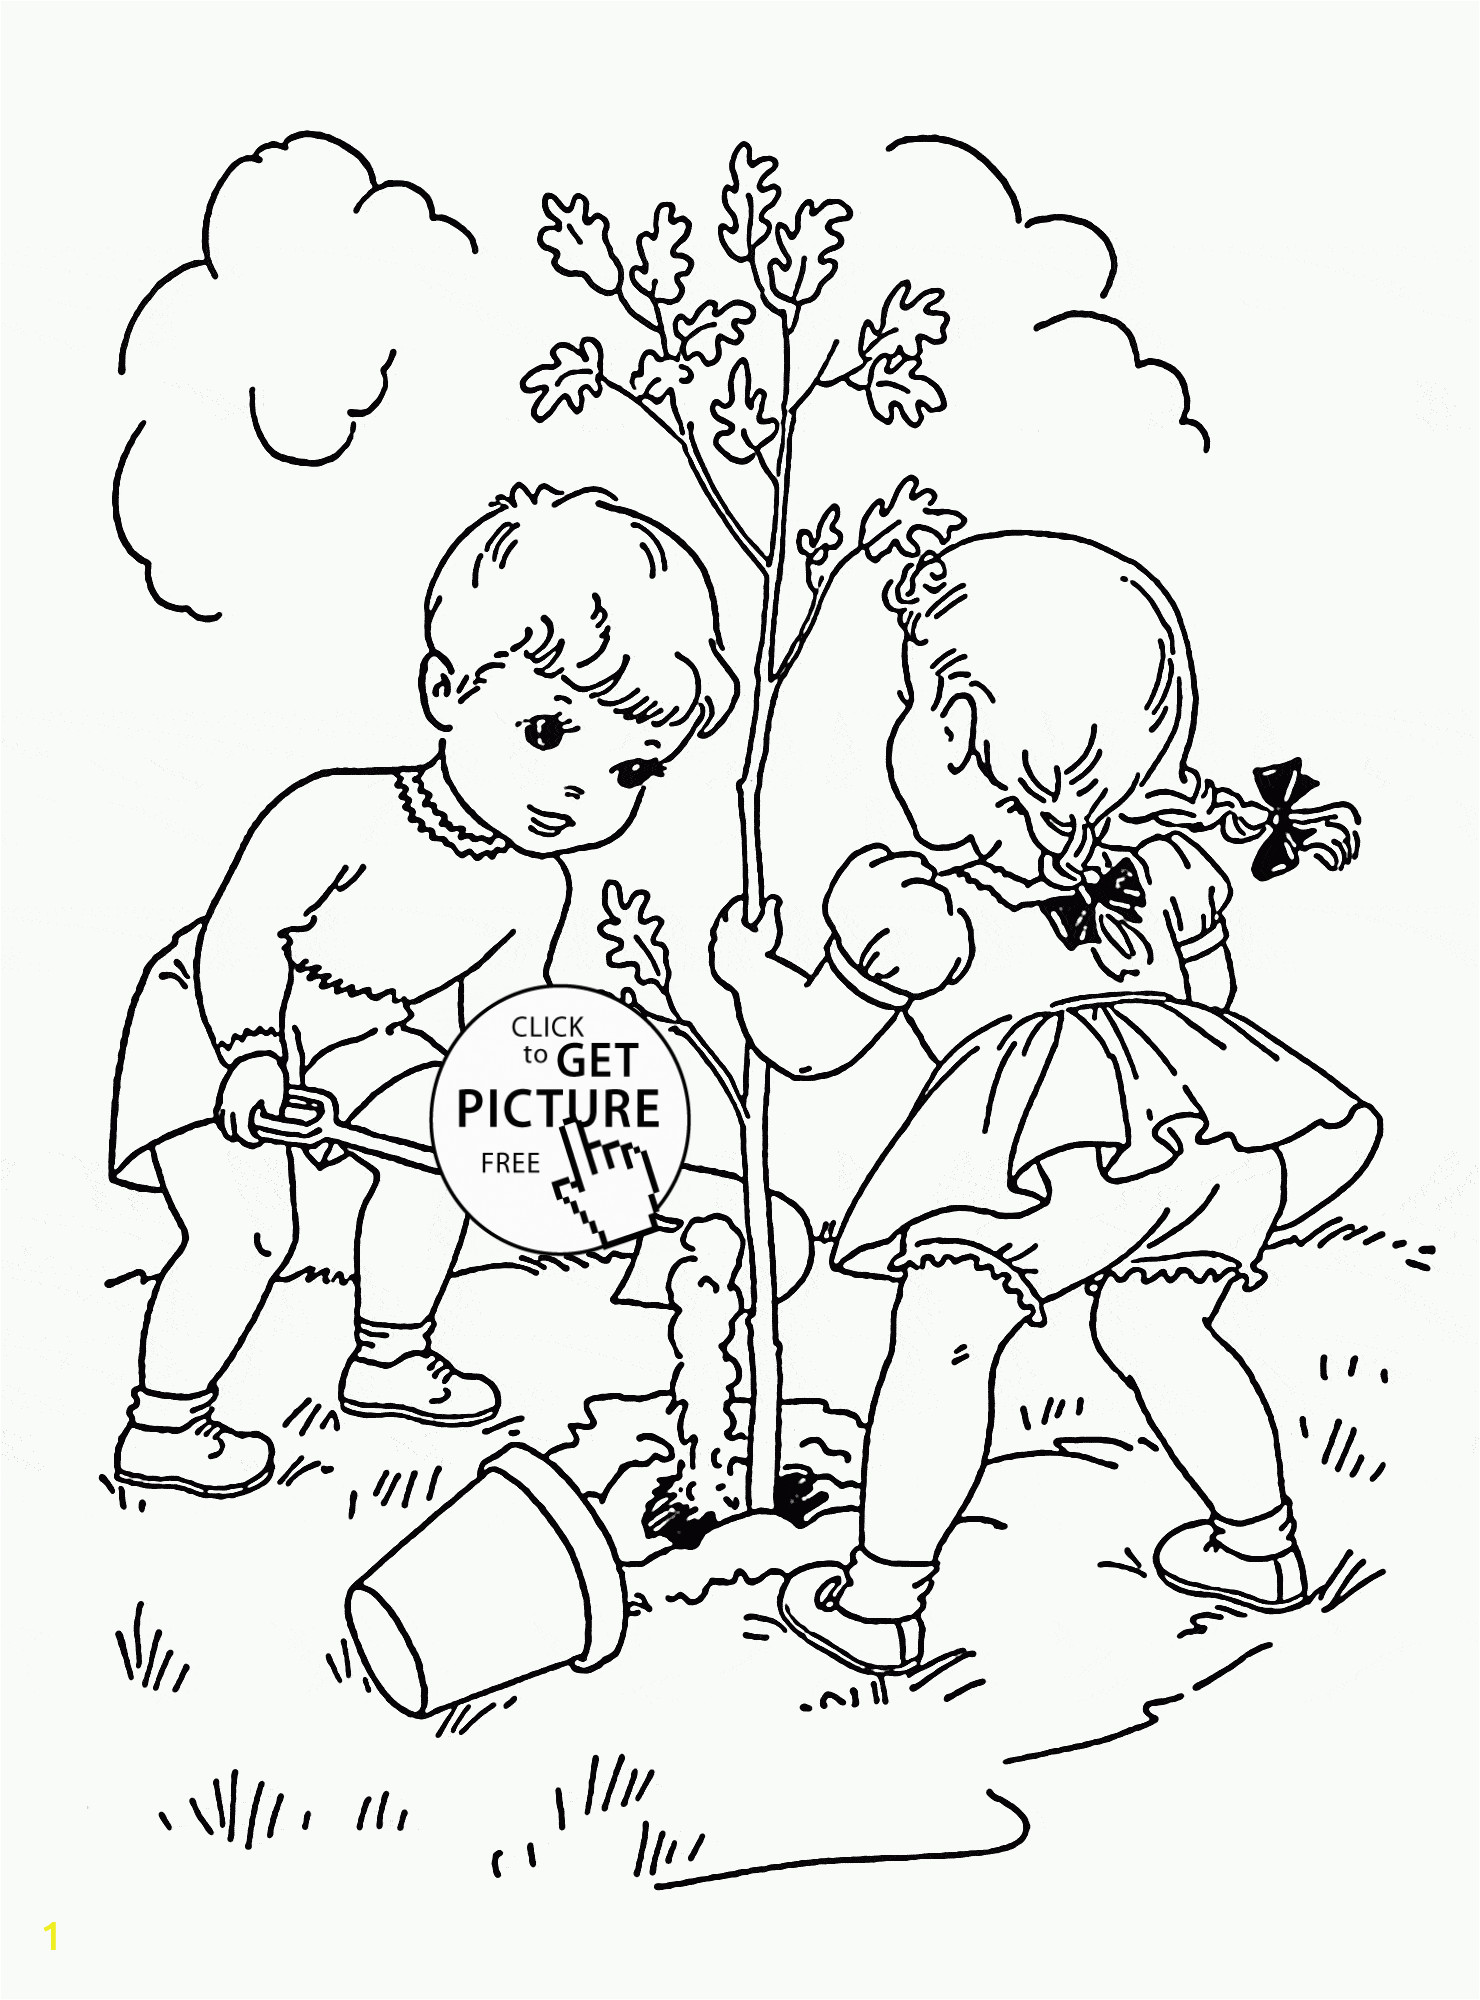 Coloring Pages for Young Kids Children Plant Tree Coloring Page for Kids Spring Coloring